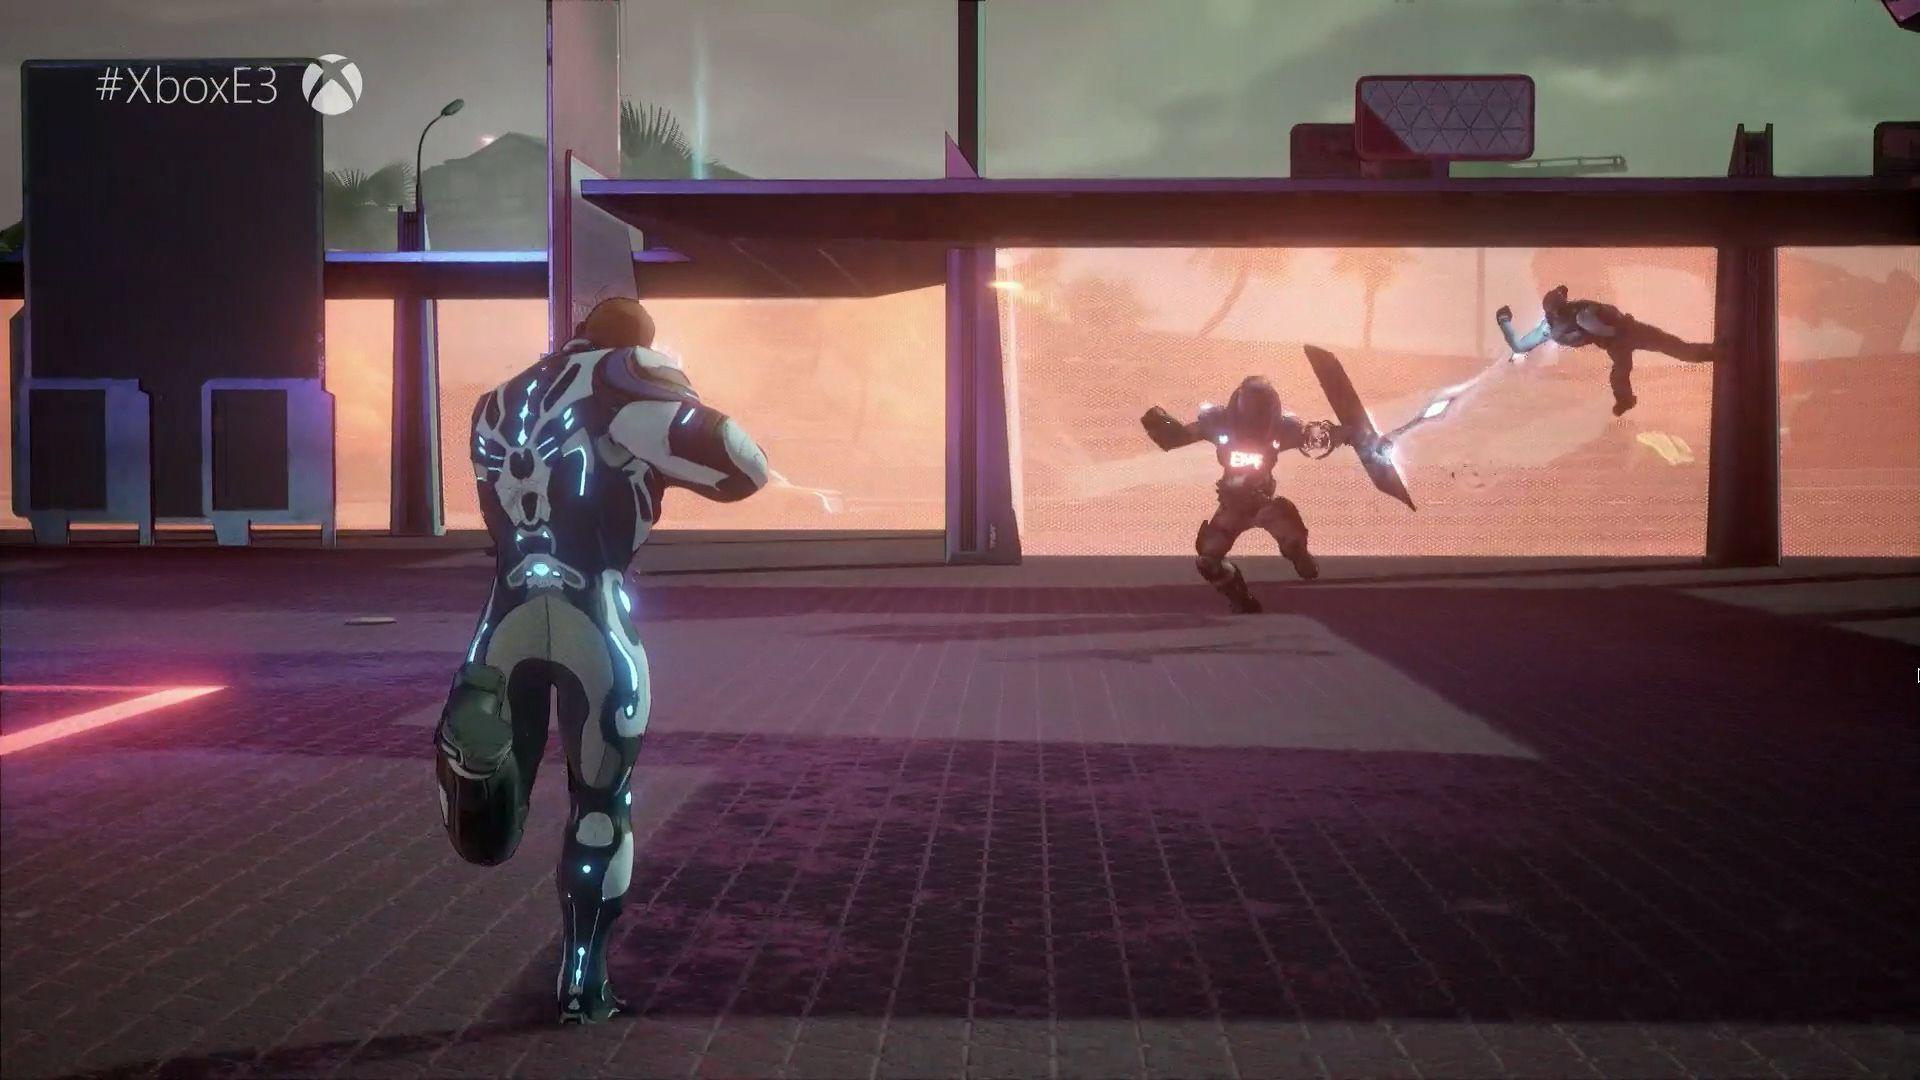 Crackdown 3 trailer shows Terry Crews destroy everything in sight